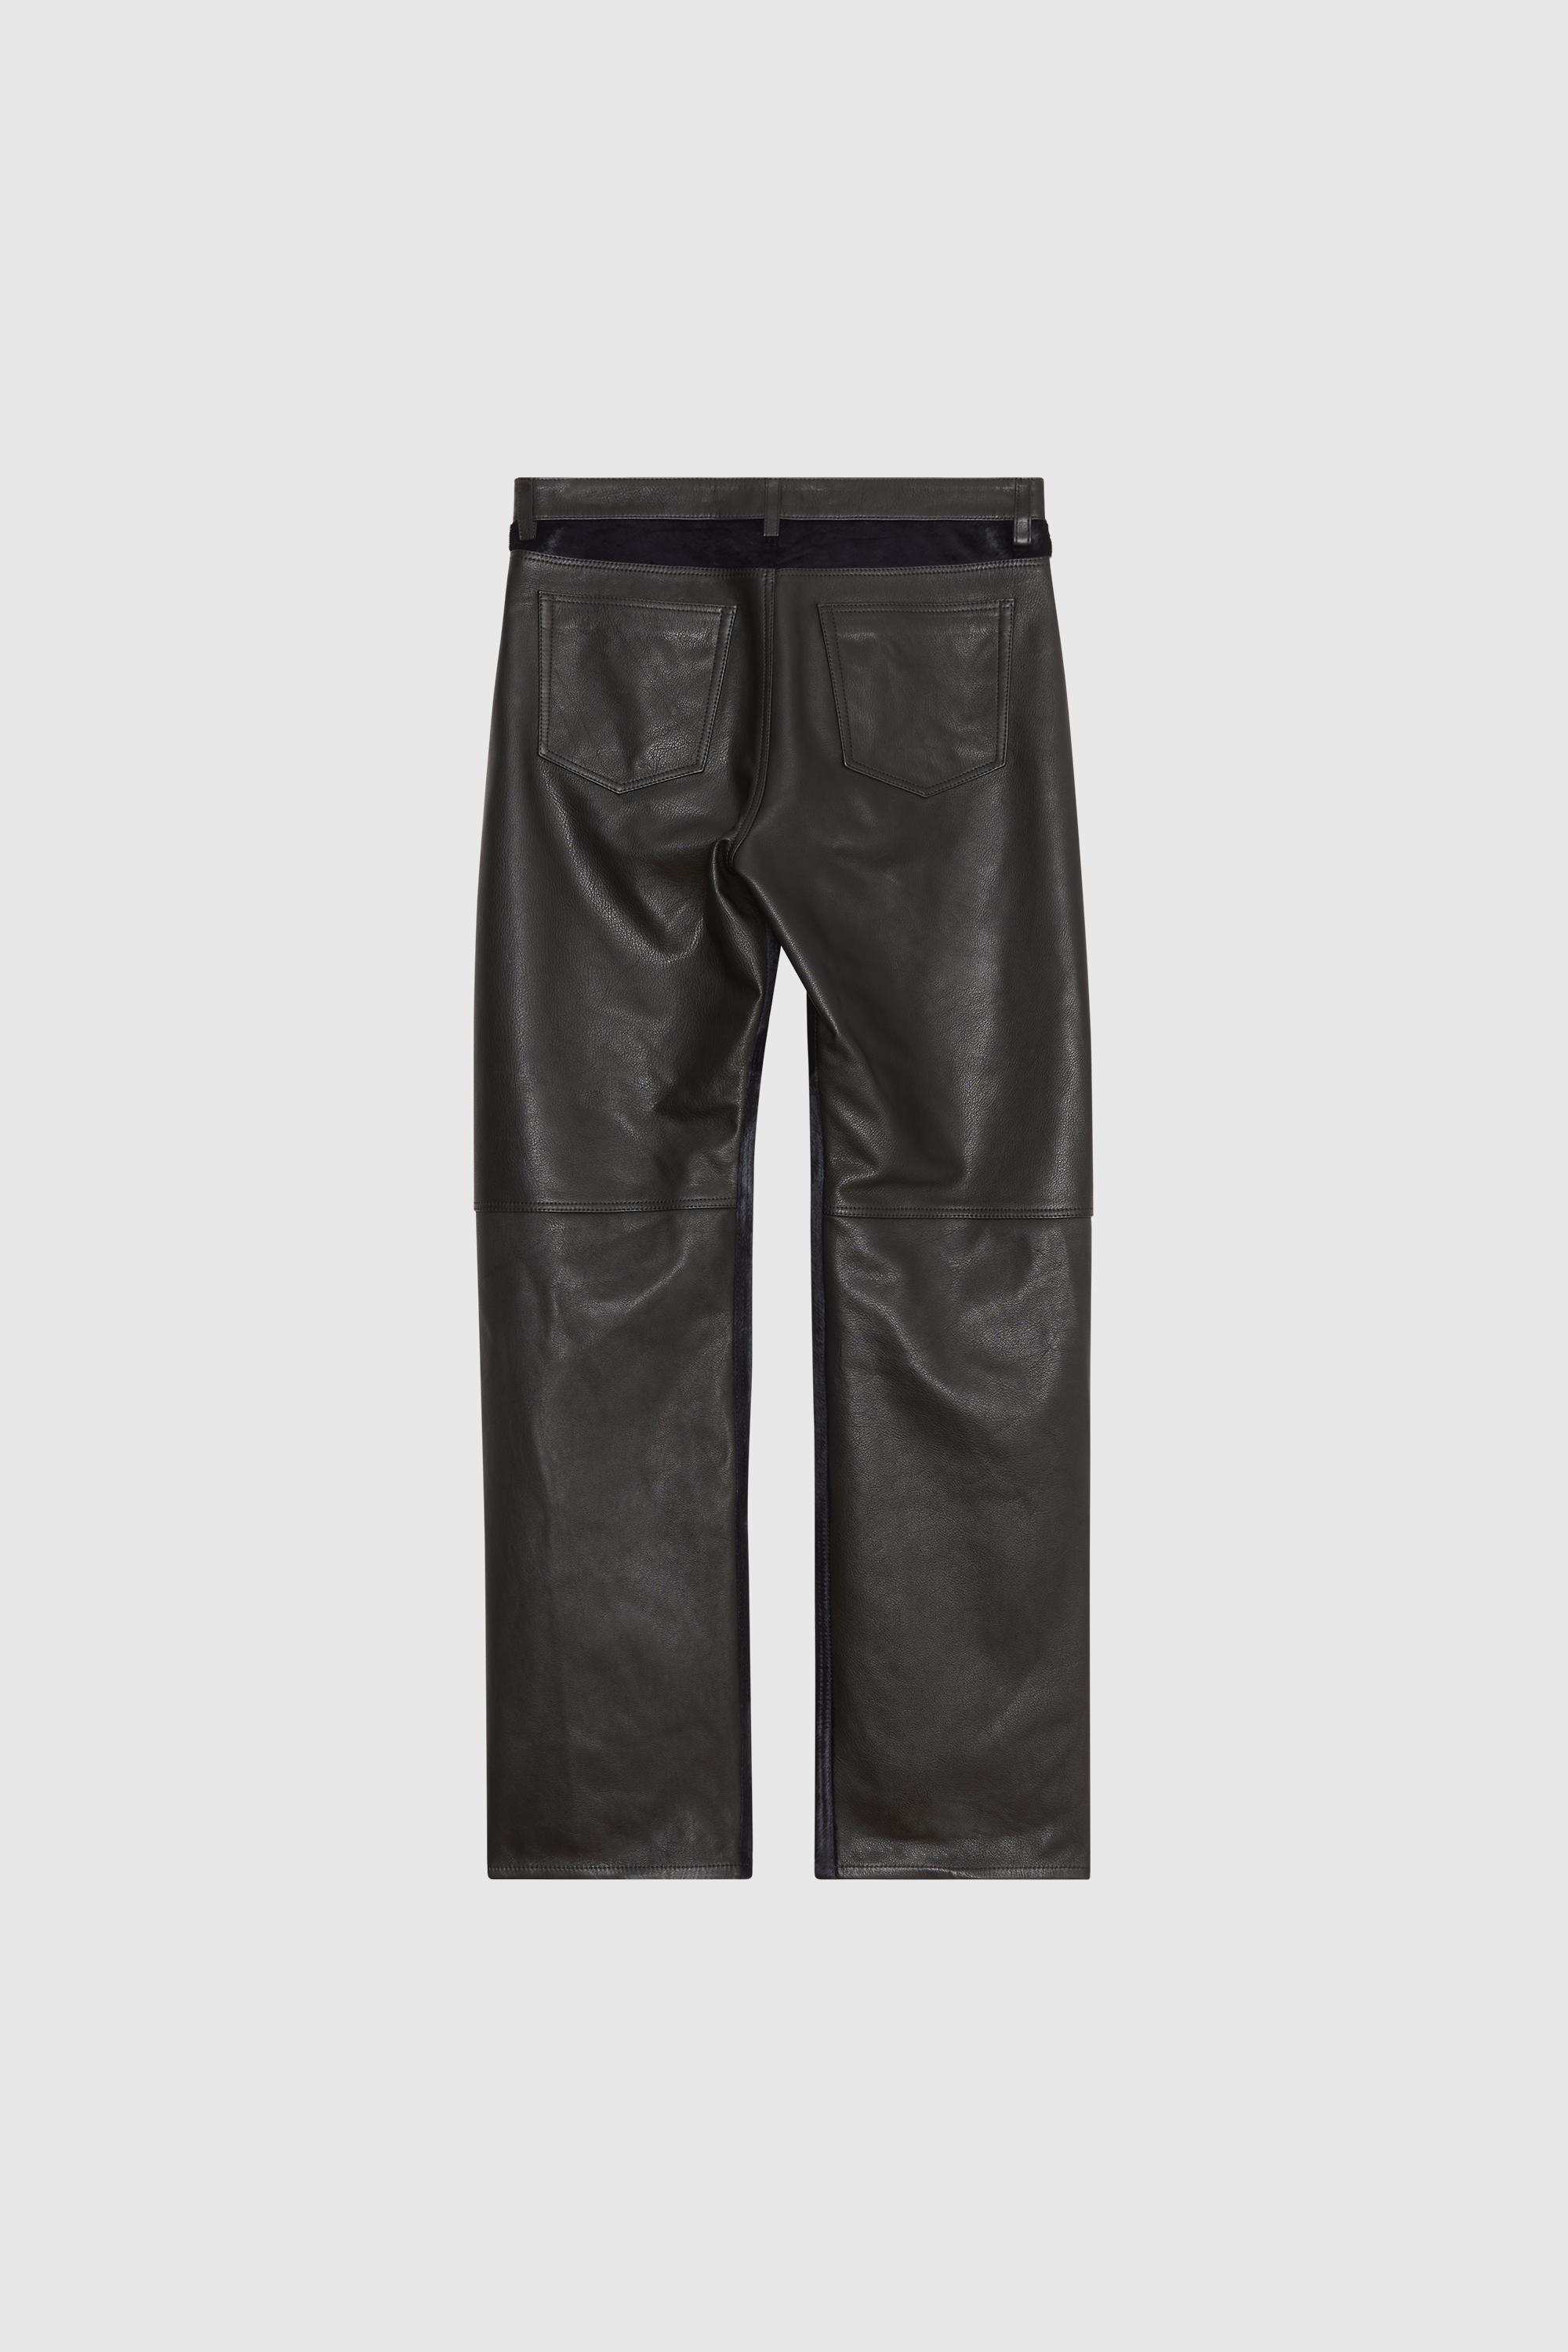 Navy Leather Look Biker Leggings For Women's | International Society of  Precision Agriculture